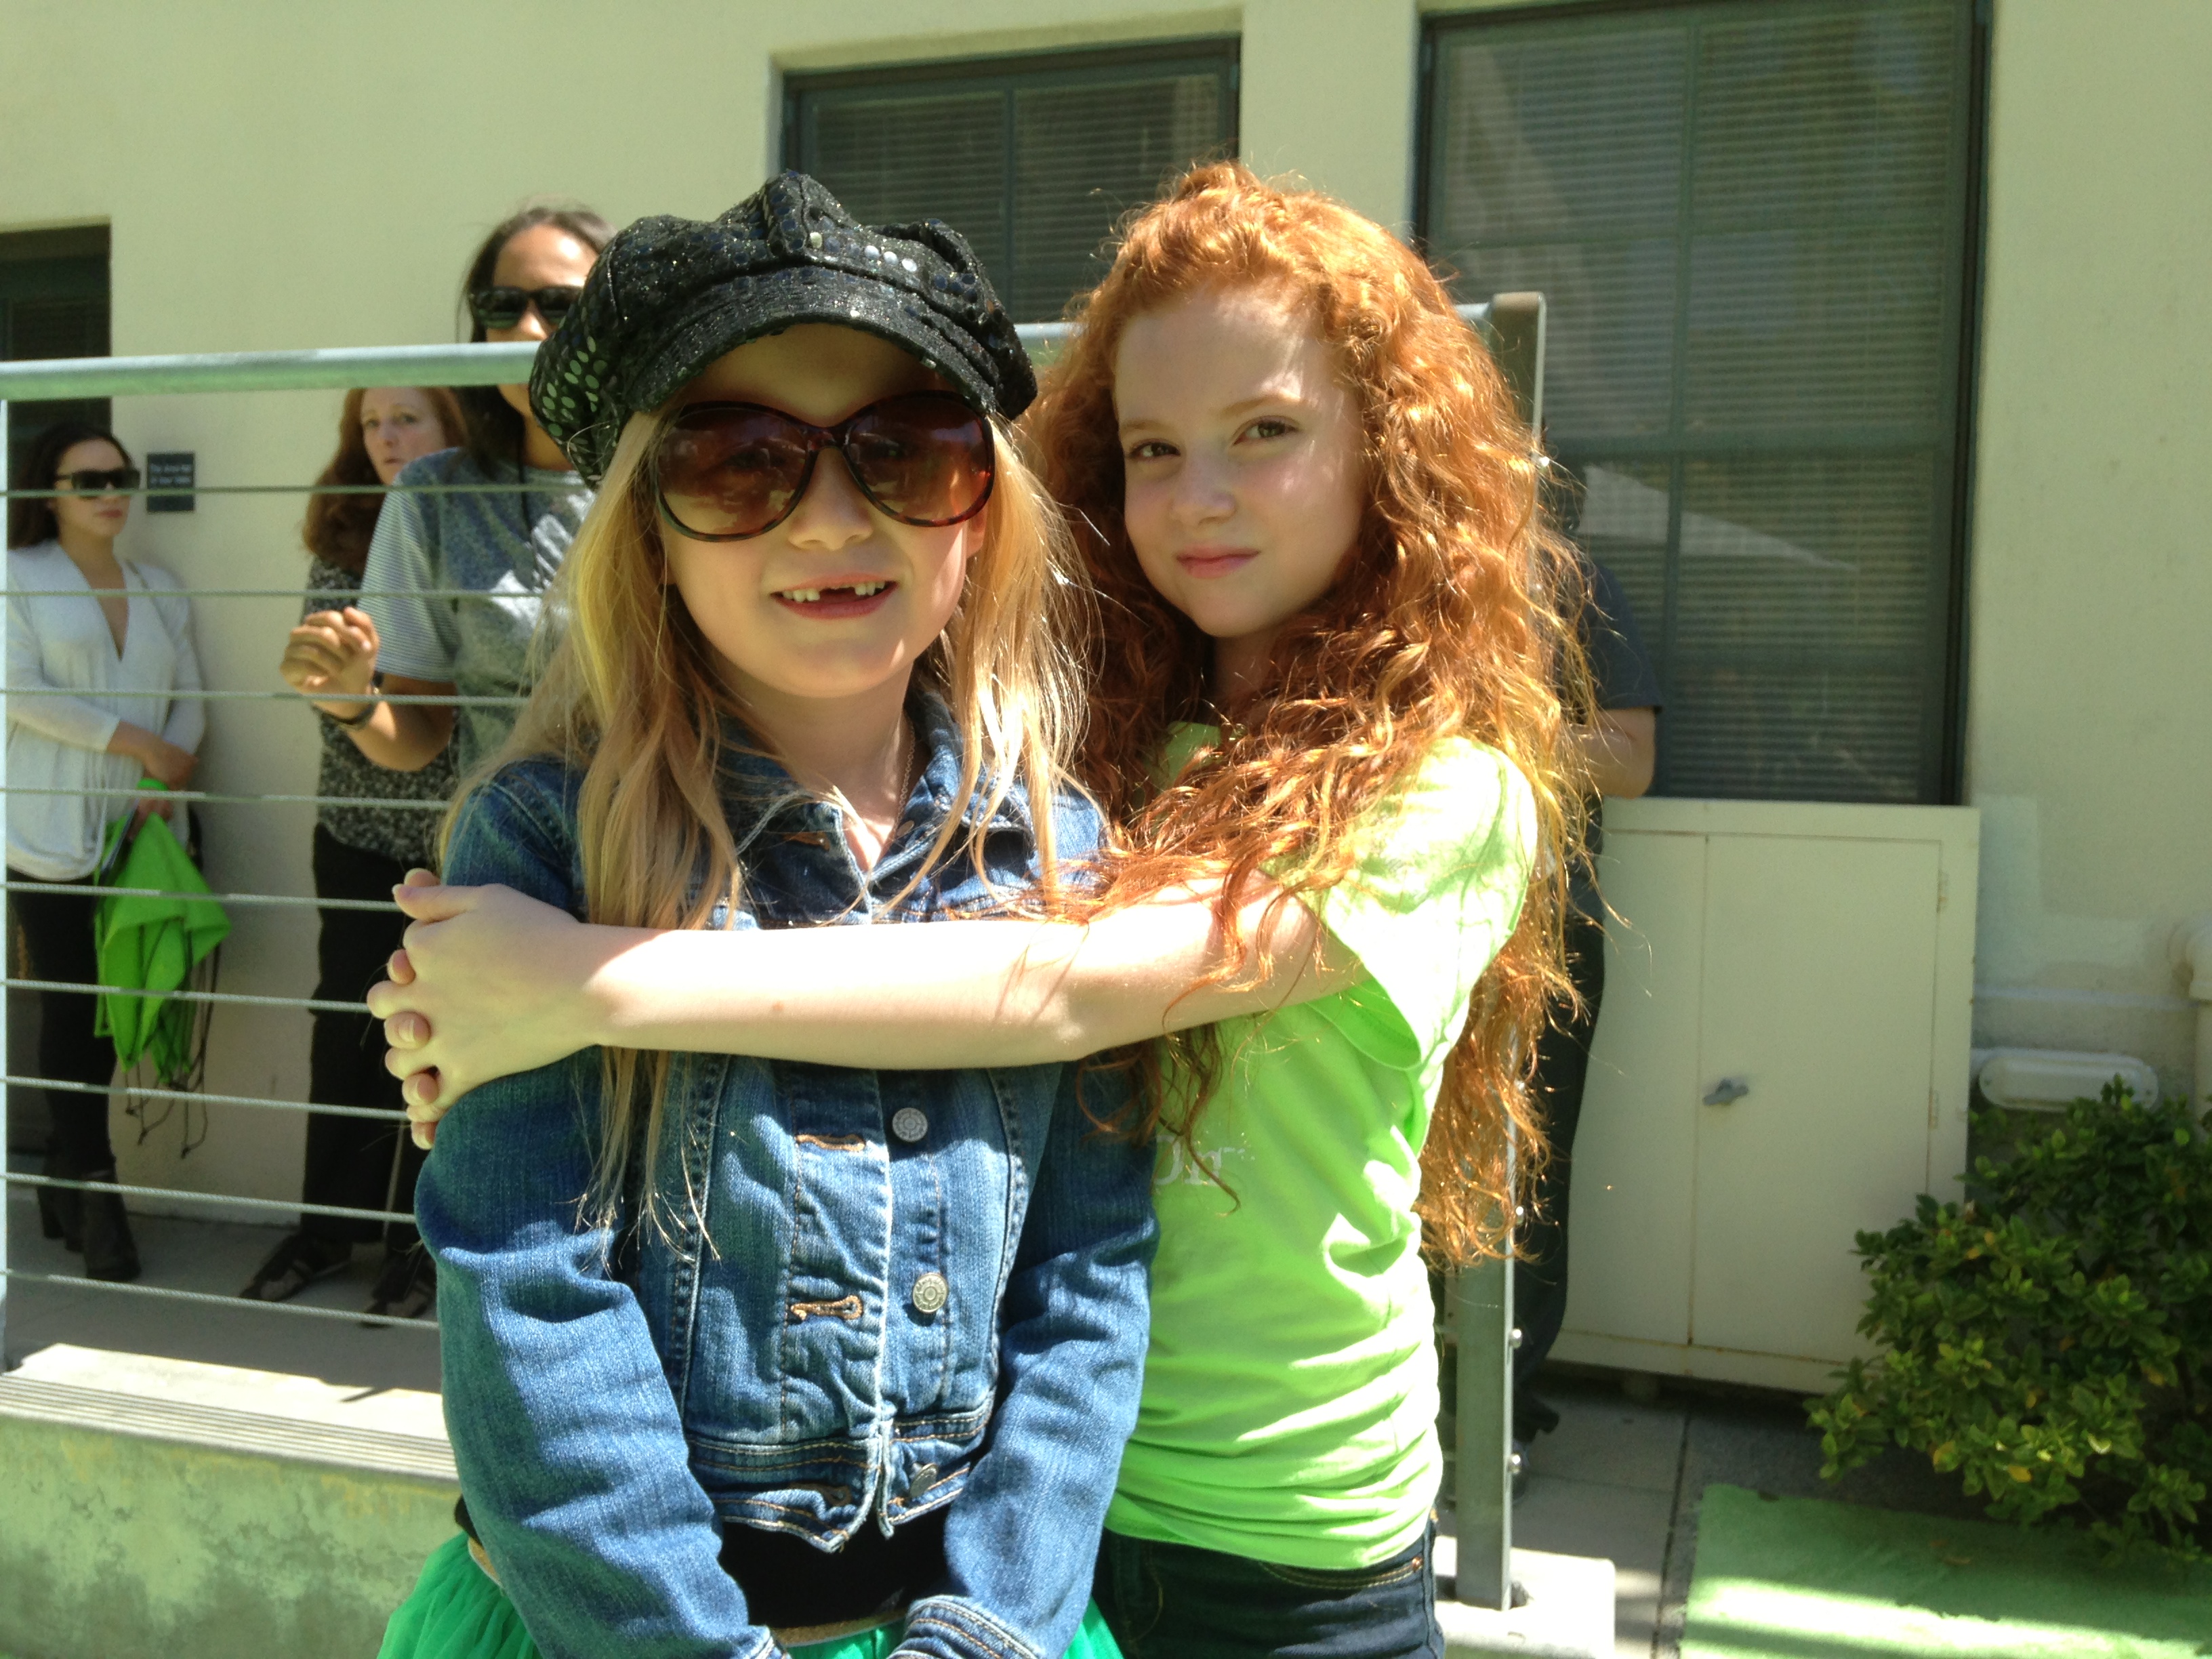 Actress Abigail Zoe Lewis with Francesca Capaldi. Attends Points of Light generationOn Block Party on April 18, 2015 in Los Angeles, California.